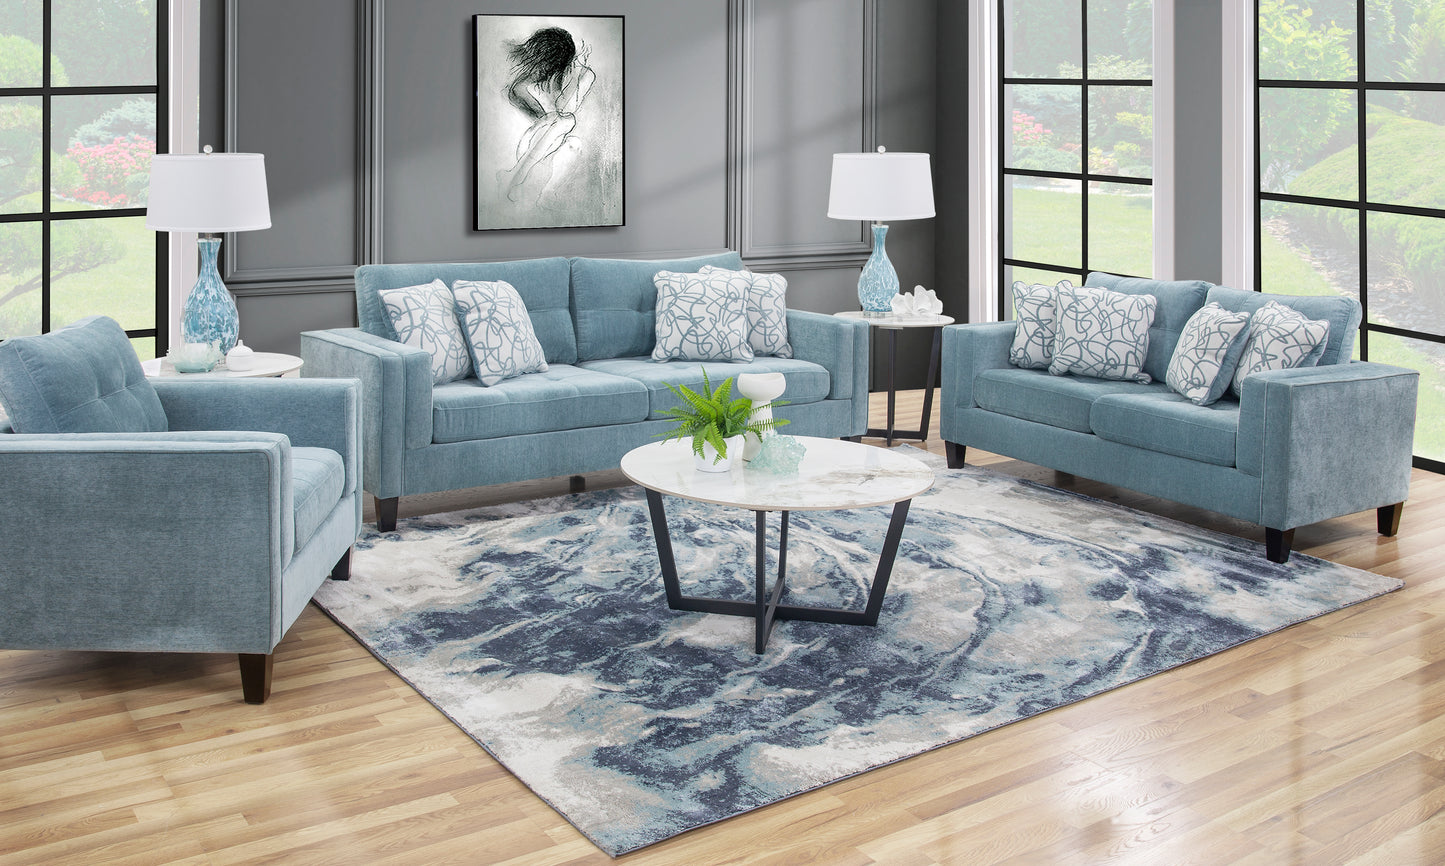 Fleming Teal 5 Piece Living Room